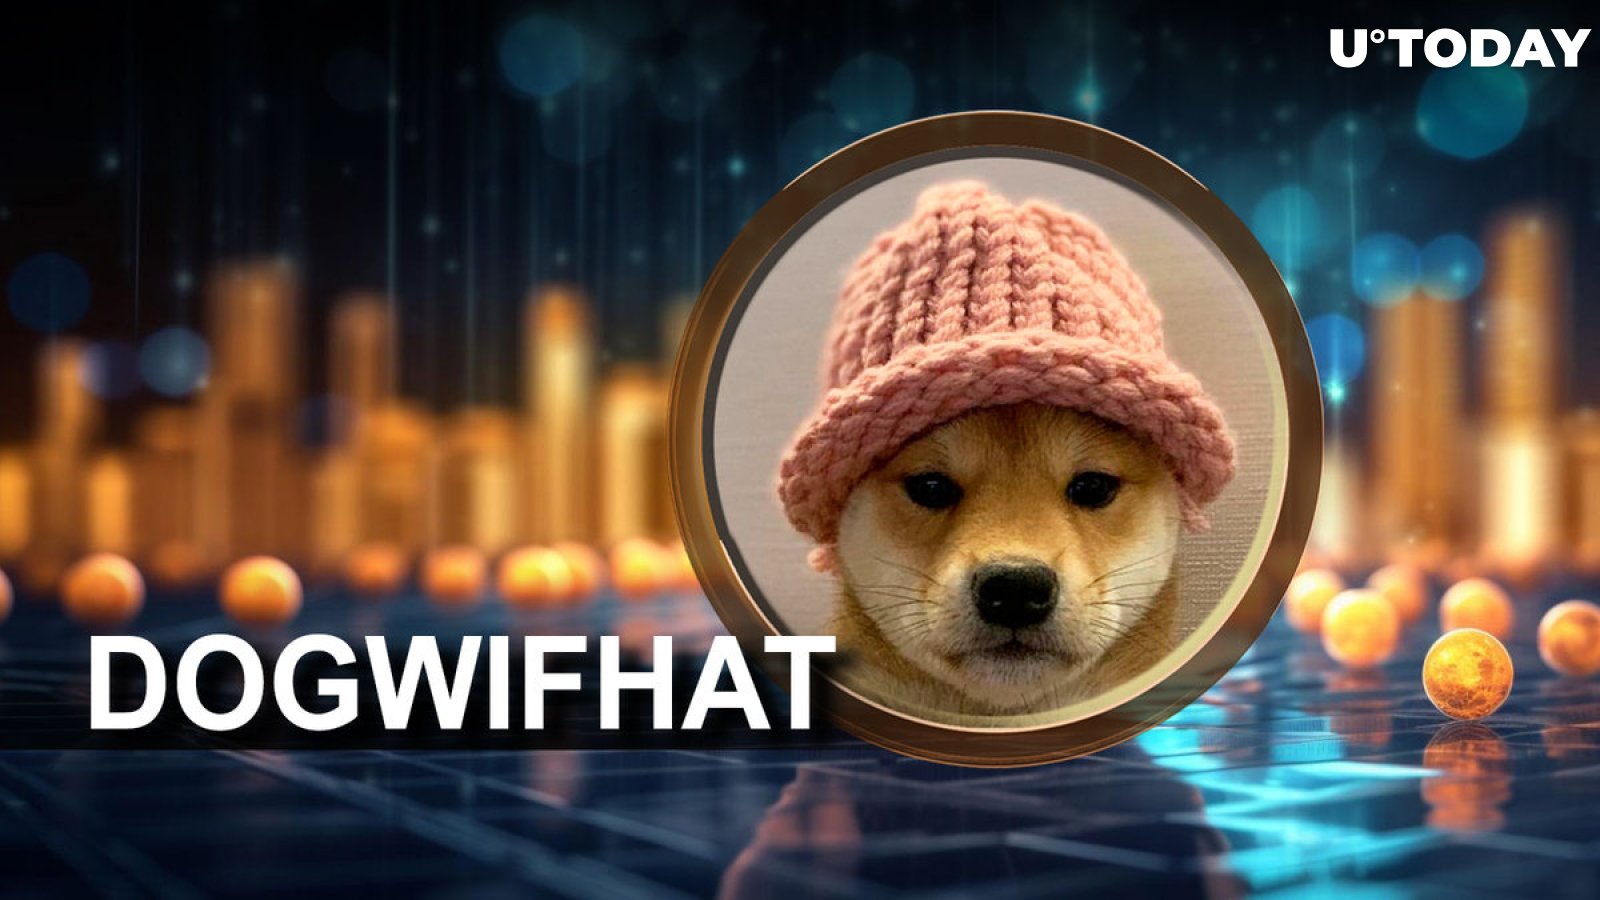 Solana Meme Coin Dogwifhat Jumps 100% as Binance Speculation Heats Up